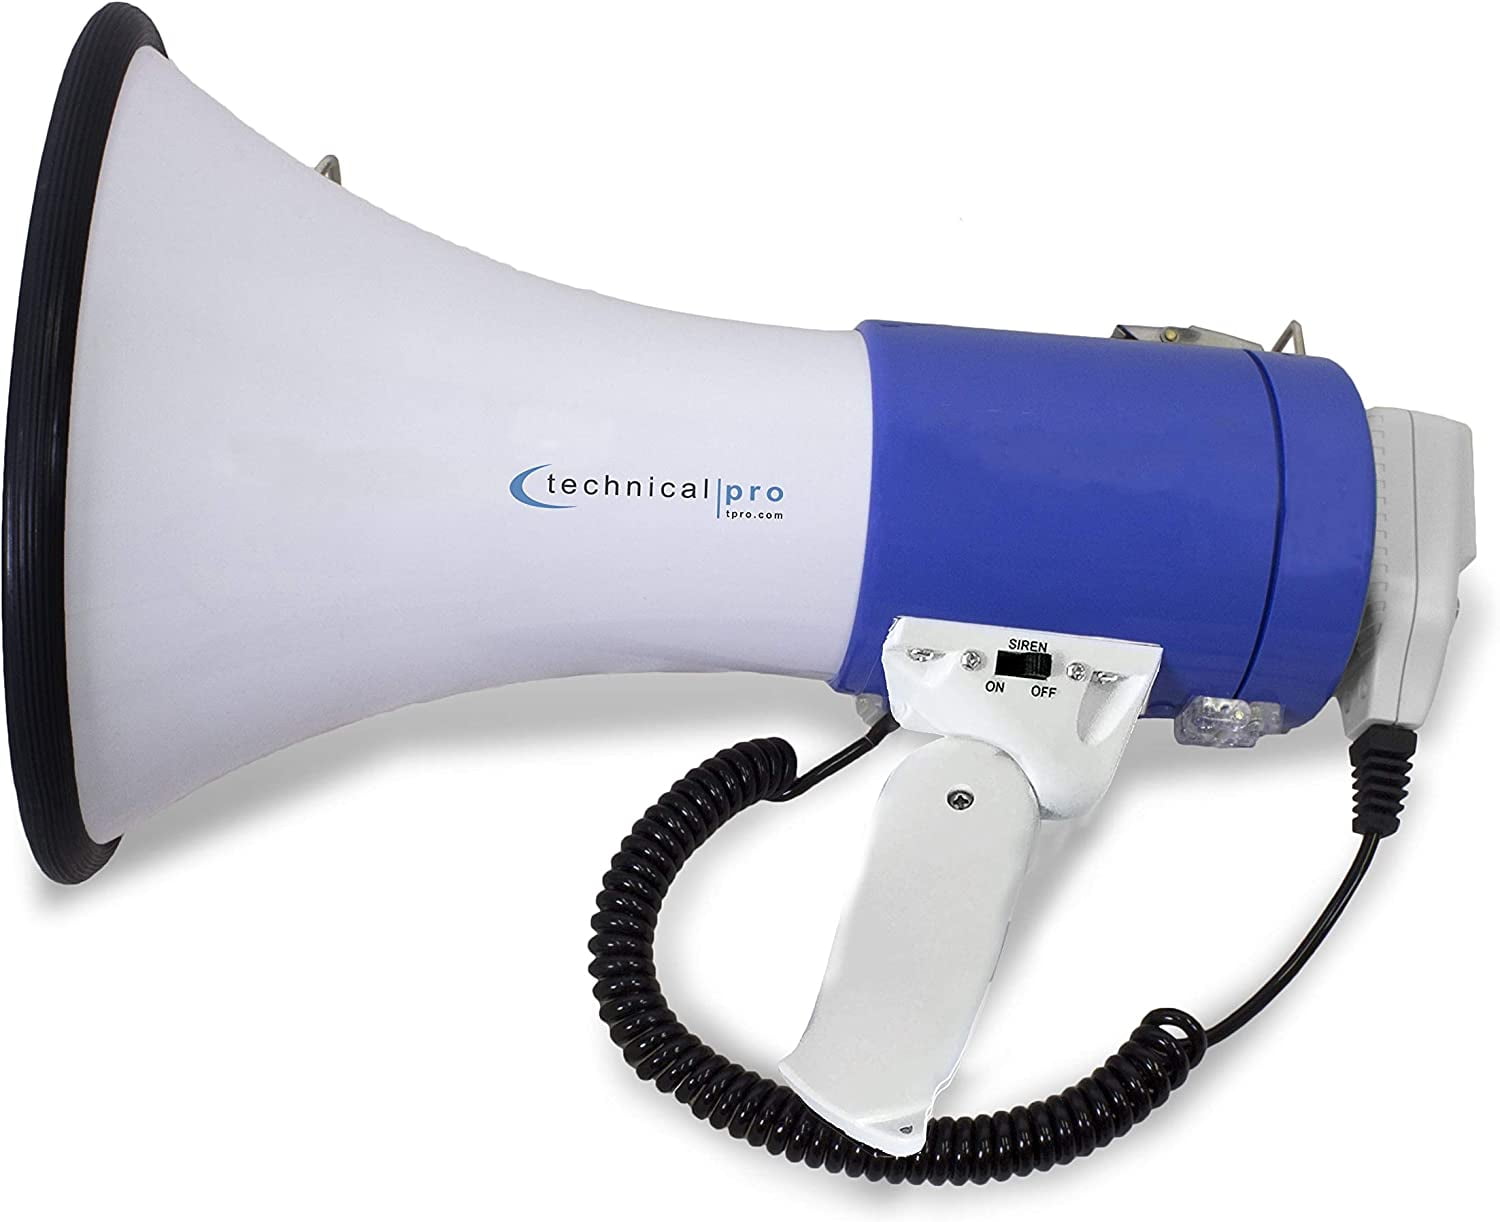 Technical Pro Megaphone With Siren and USB/SD Input 